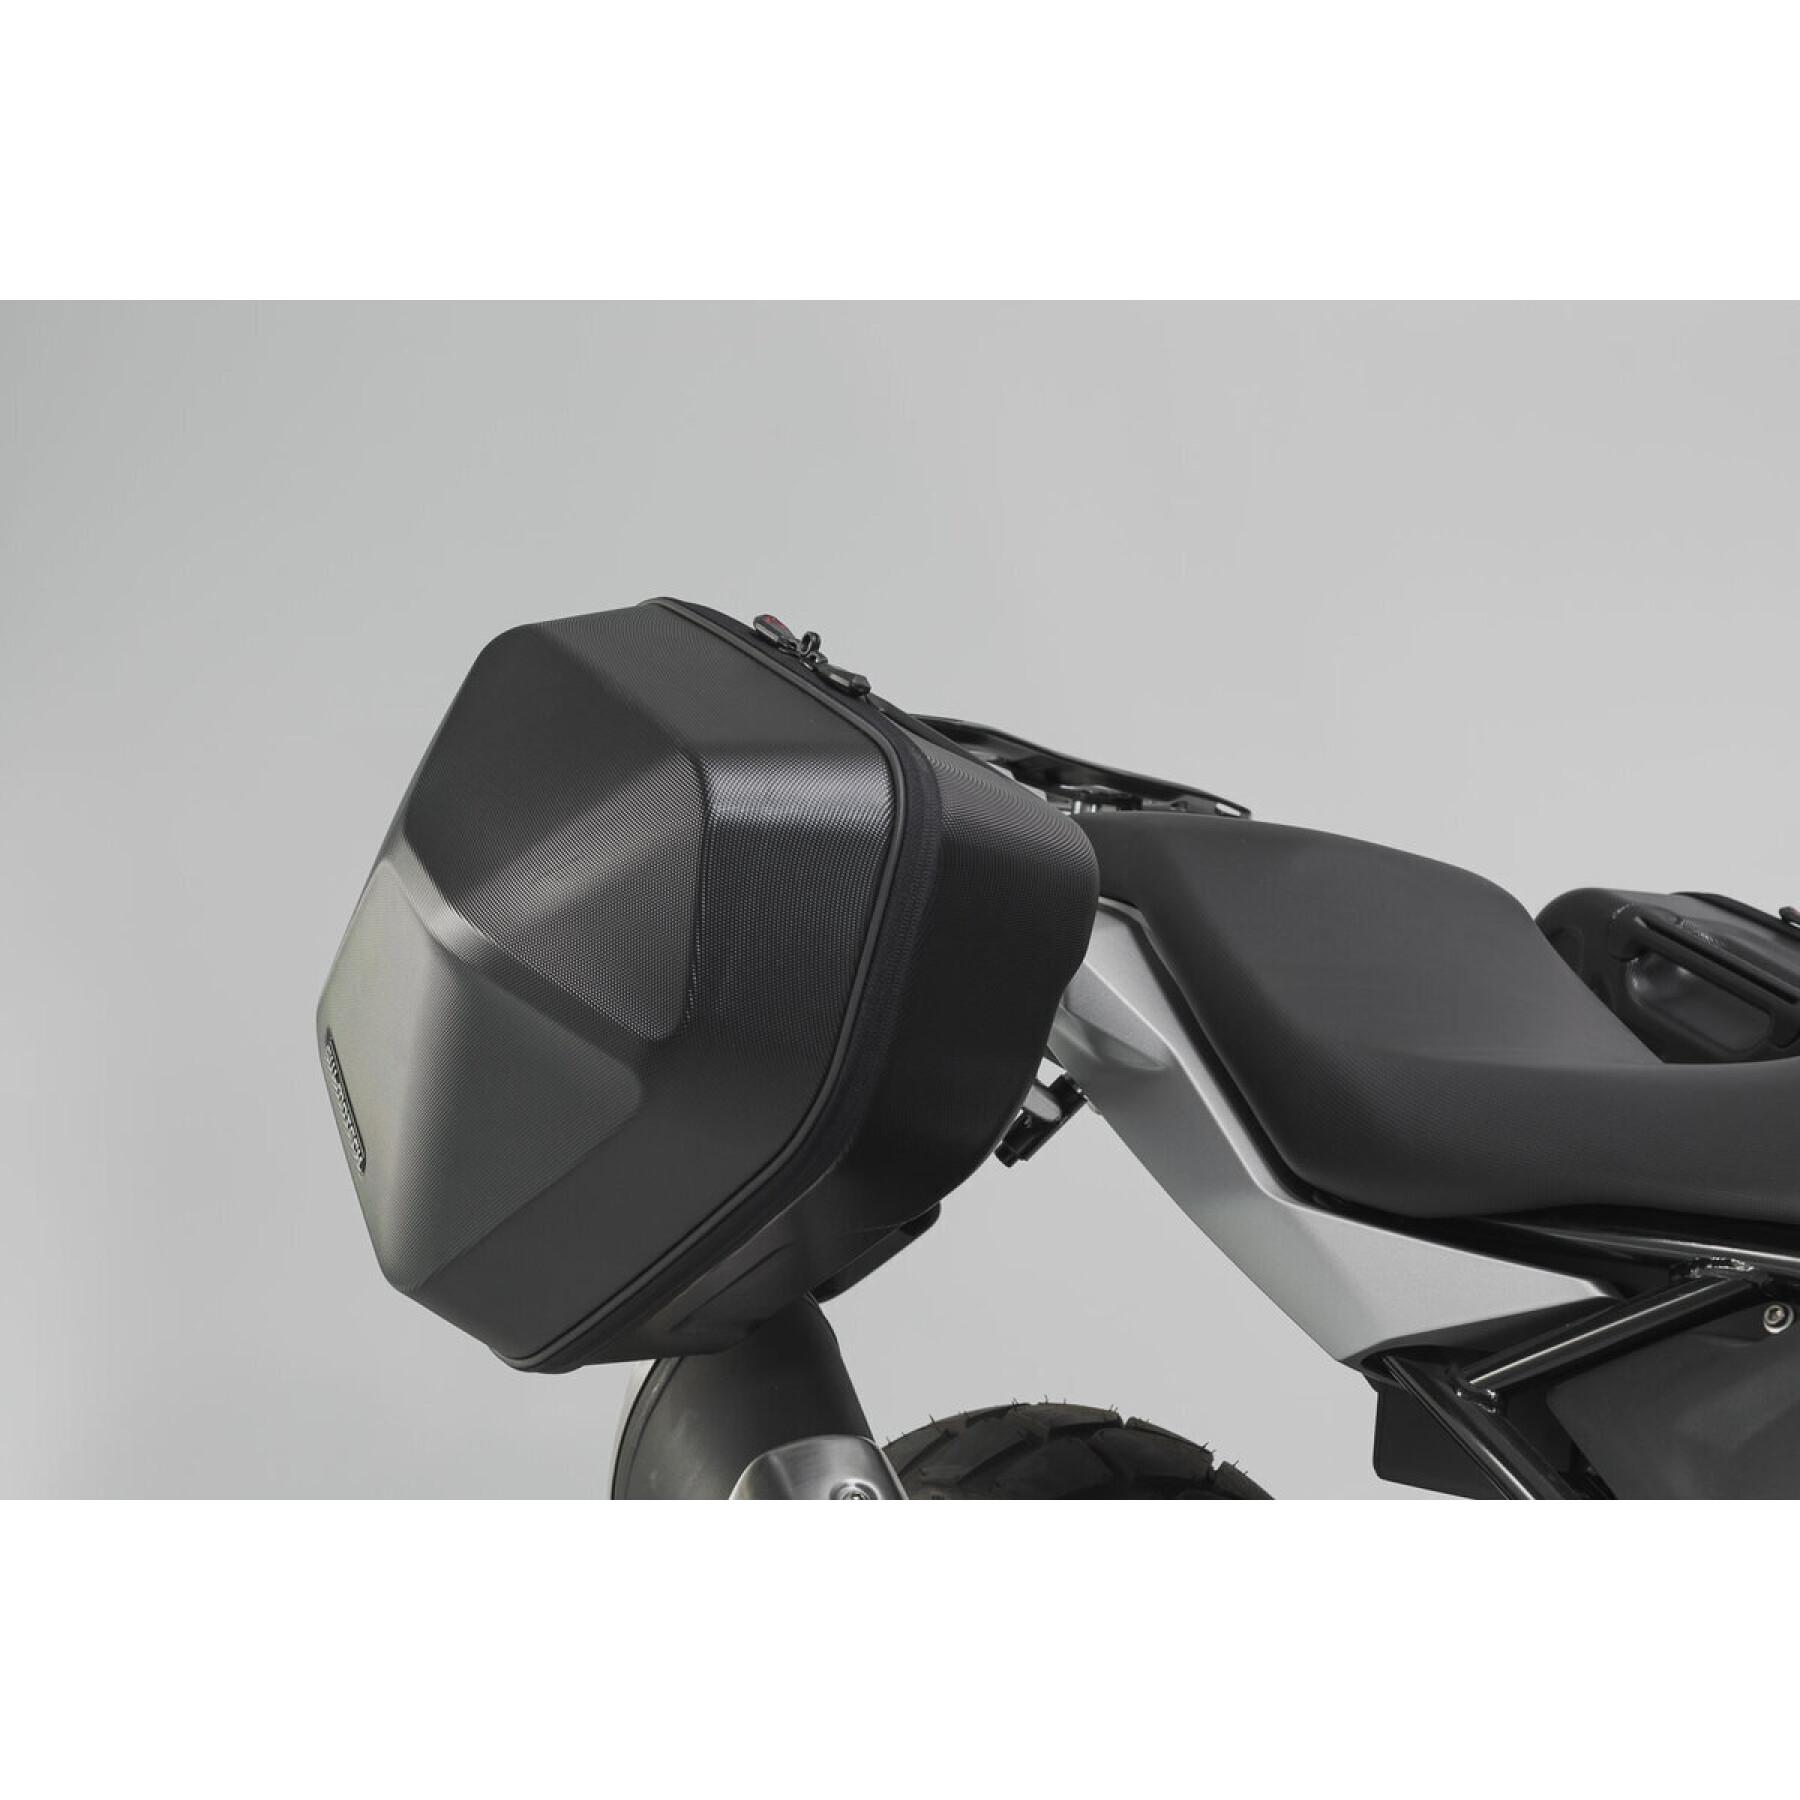 Zijdelingse bagagedrager kit SW-Motech Urban abs. 2x 16,5 l. Bmw g 310 gs (17-)